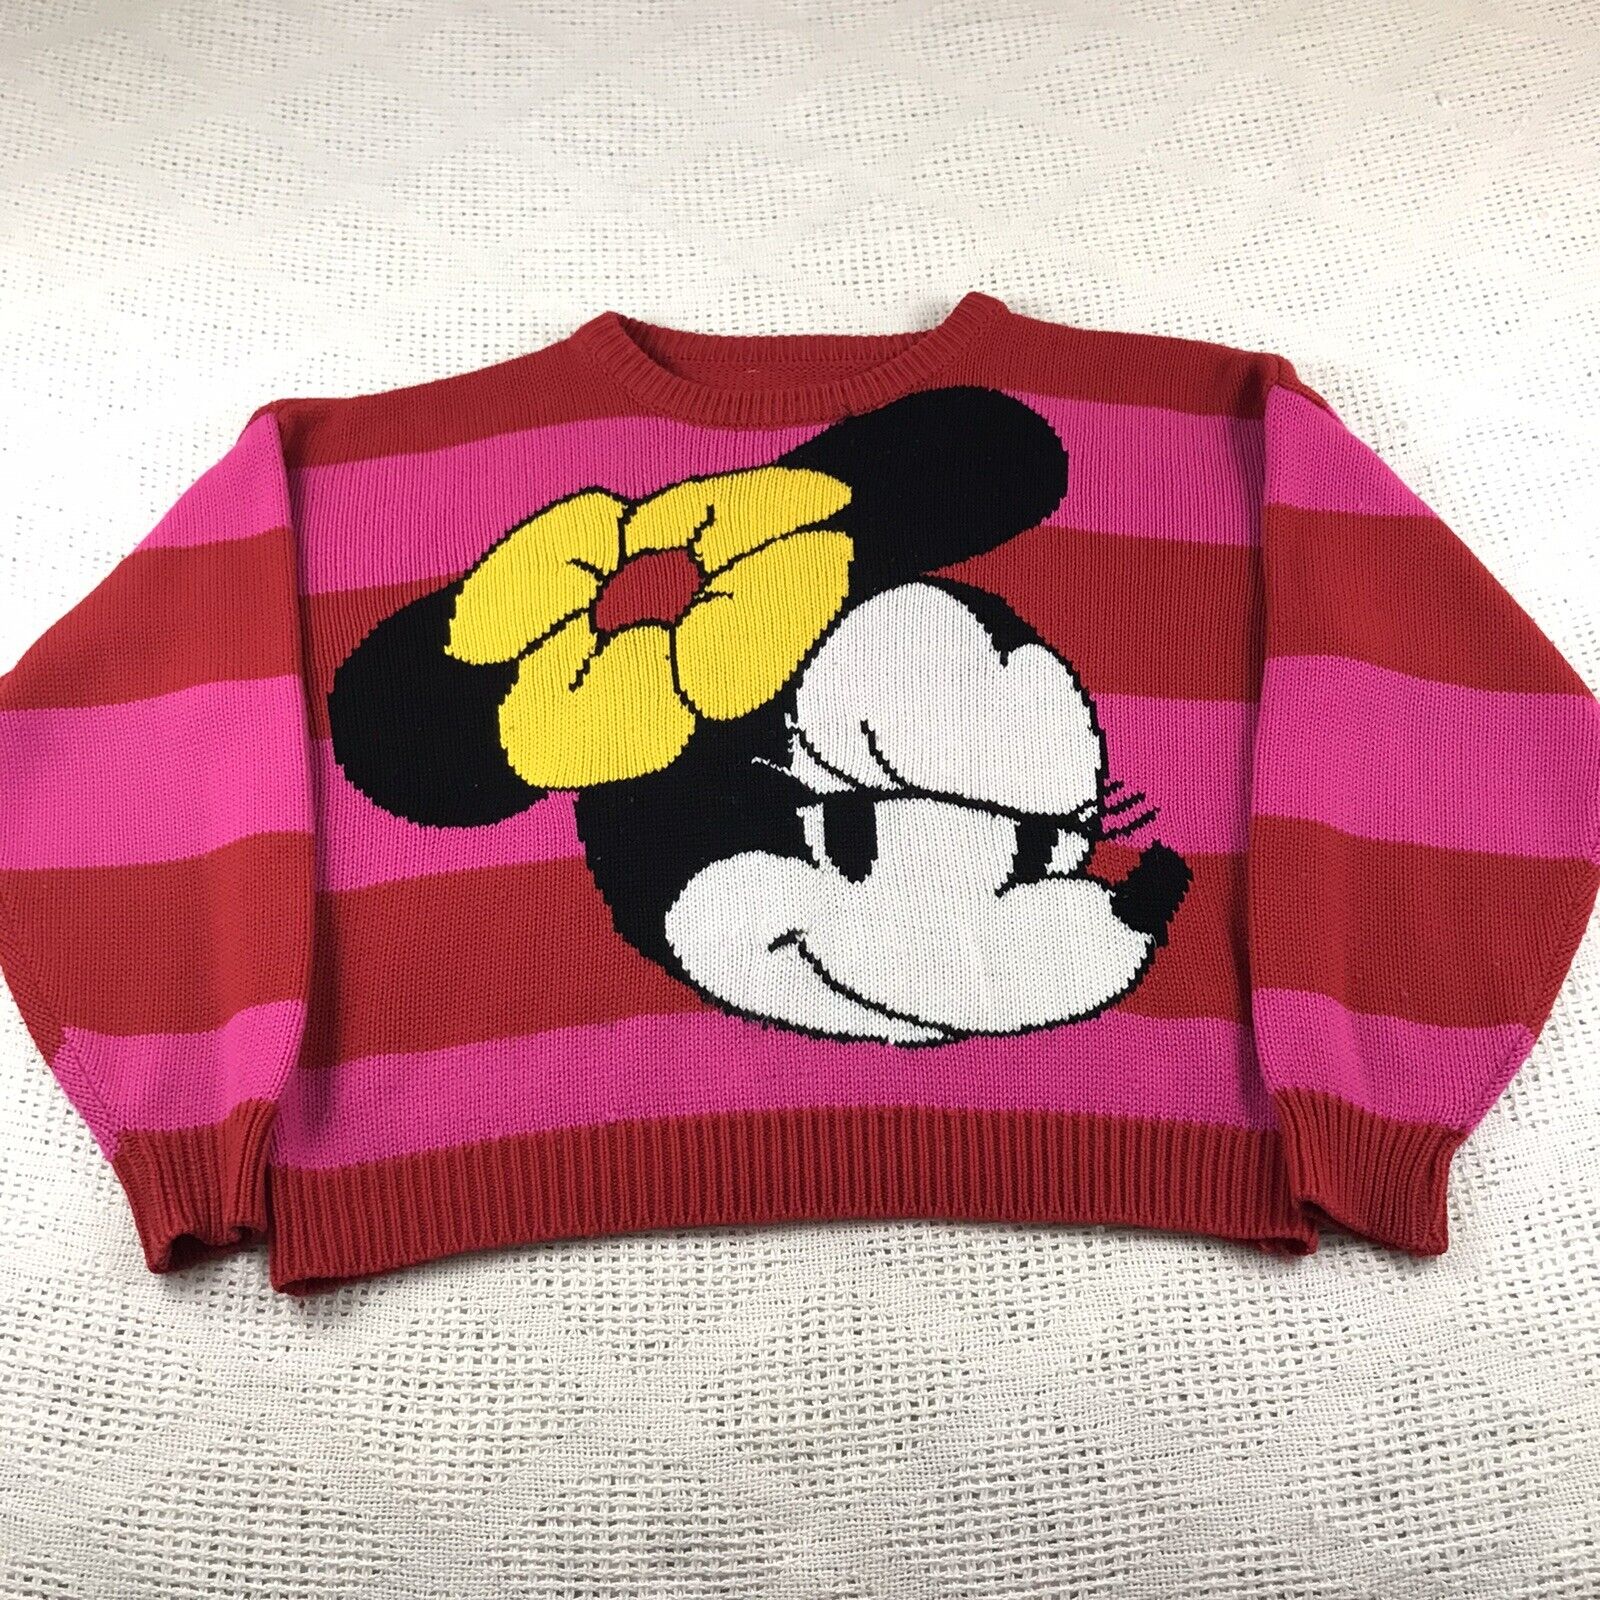 Minnie Mouse Sweater Vintage Intarsia Acrylic Pink Red Striped Knit Small/Med